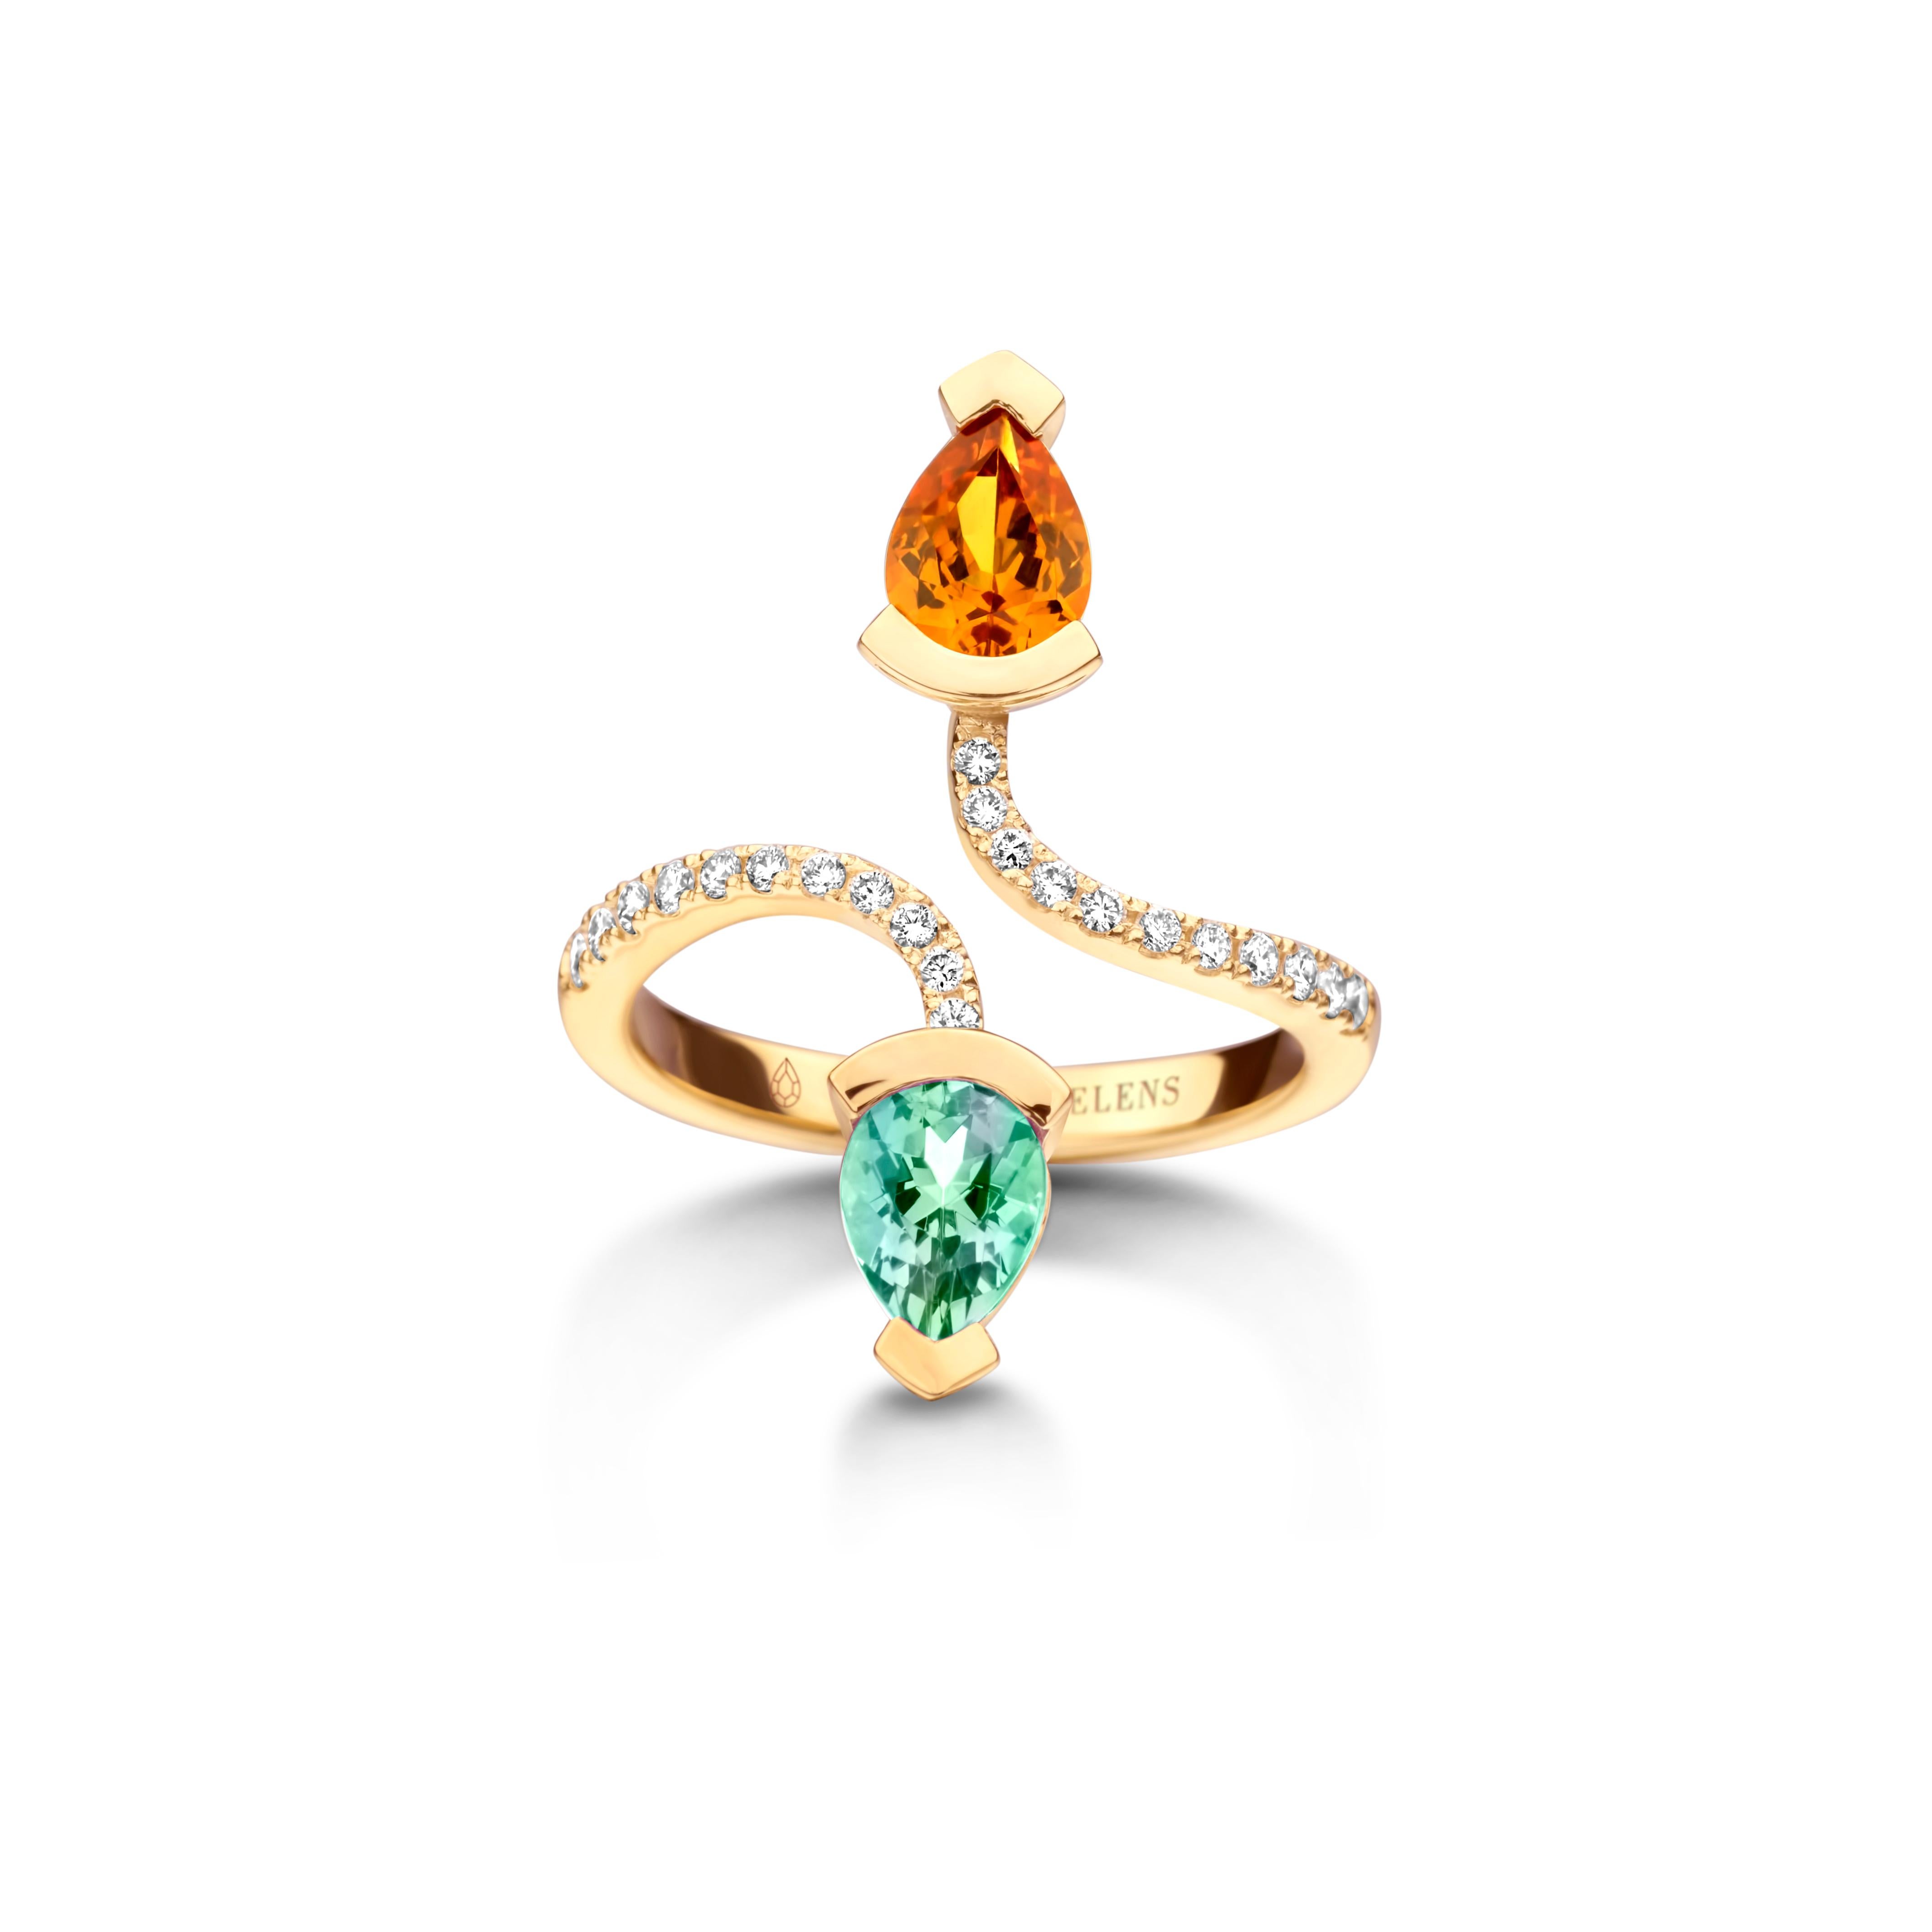 Adeline Duo ring in 18Kt white gold 5g set with a pear-shaped mandarin garnet 0,70 Ct, a pear-shaped mint tourmaline 0,70 Ct and 0,19 Ct of white brilliant cut diamonds - VS F quality. Celine Roelens, a goldsmith and gemologist, is specialized in